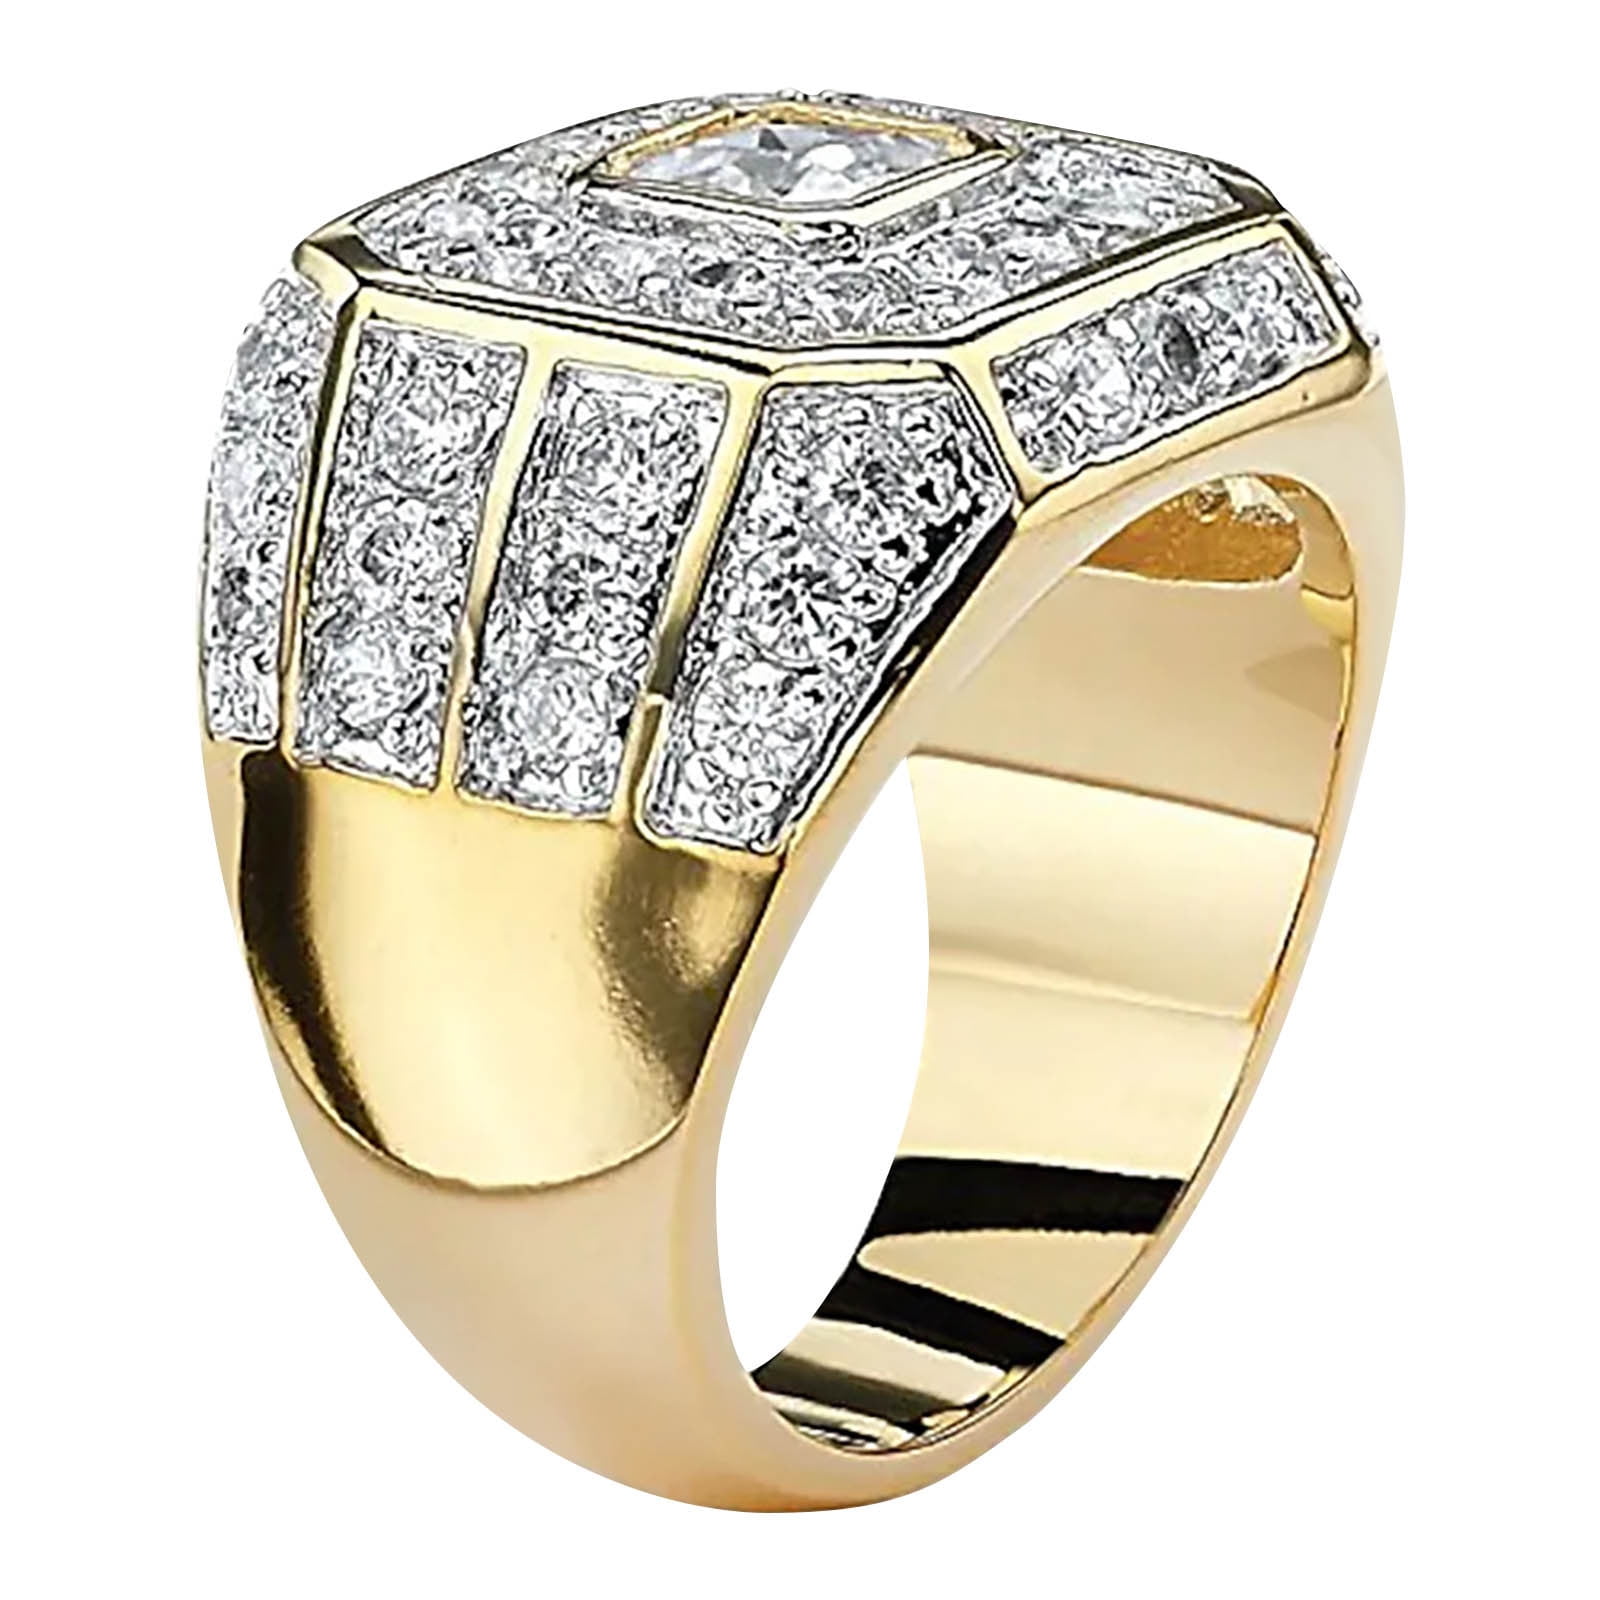 Buy CANDERE - A KALYAN JEWELLERS COMPANY BIS Hallmark 18K Yellow Gold  Wedding Band Ring for Men at Amazon.in